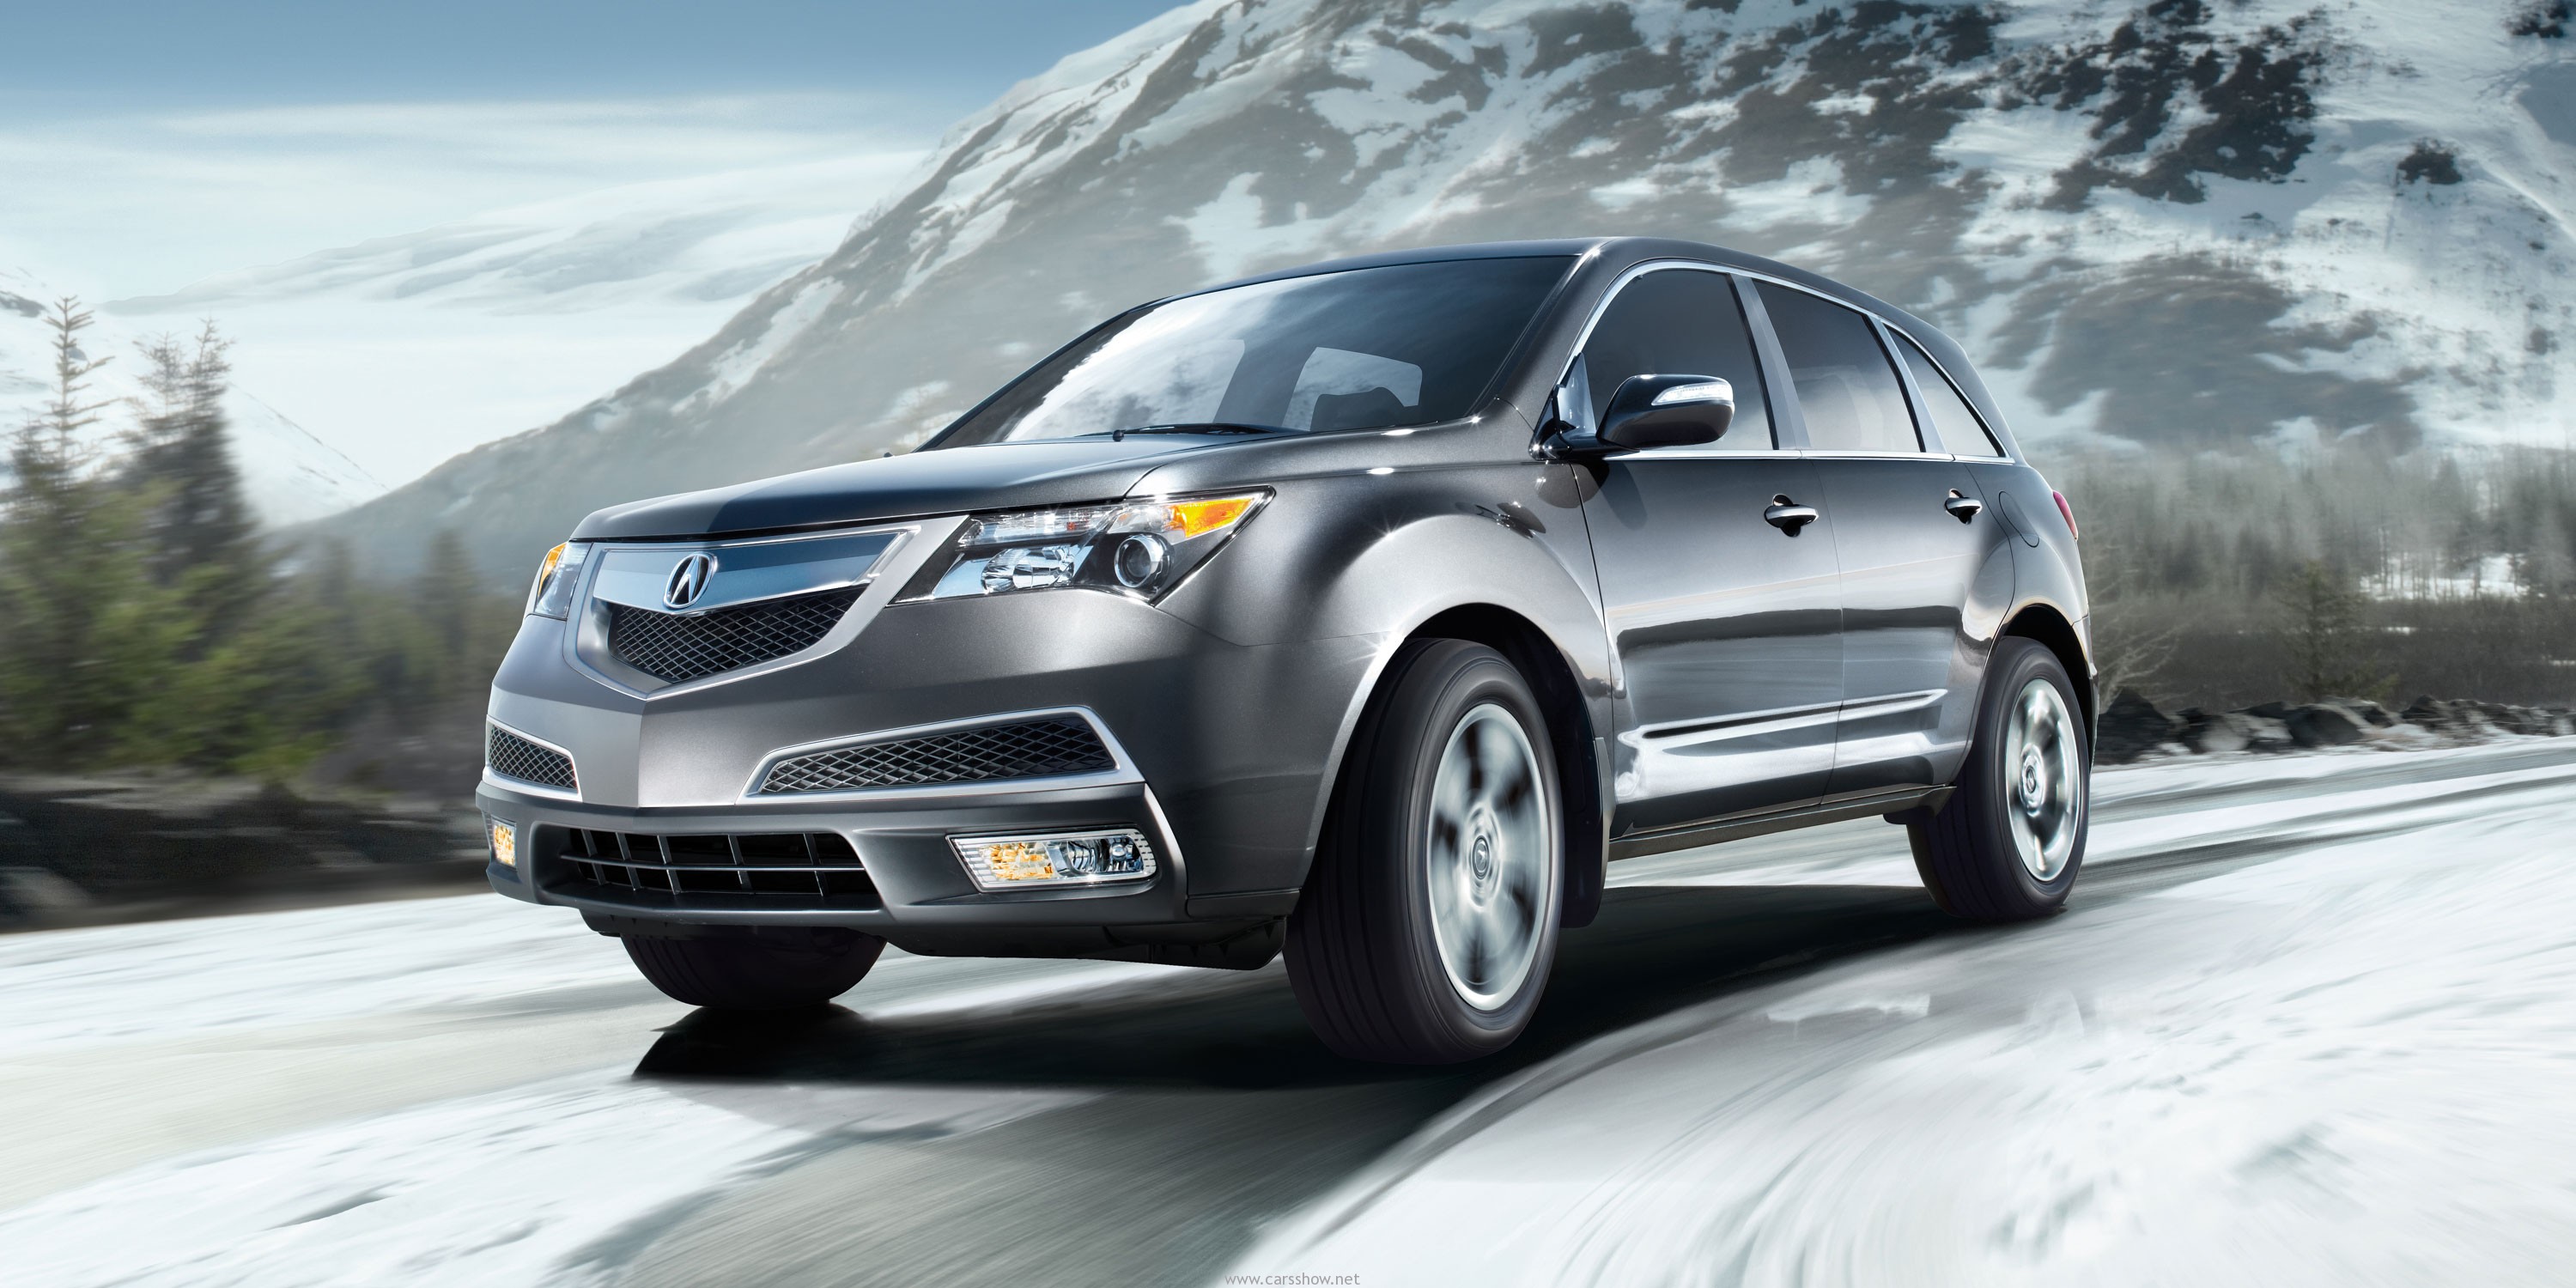 acura mdx Wallpapers hd car